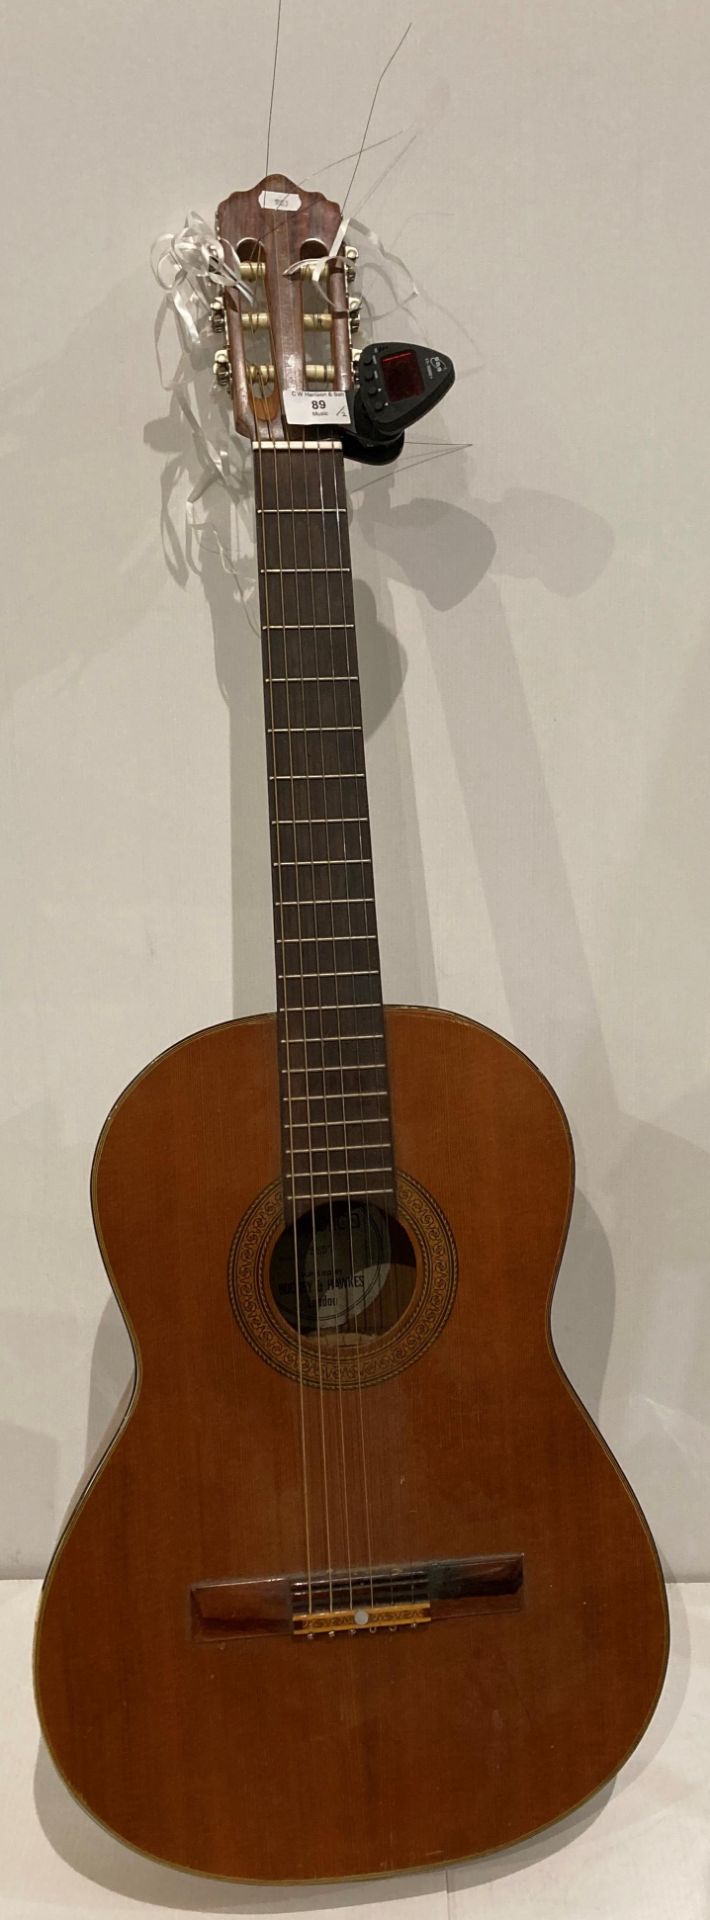 Angelica 2857 acoustic guitar and an Eno ET-3000+ auto tuner (clip on) (Saleroom location: S3)